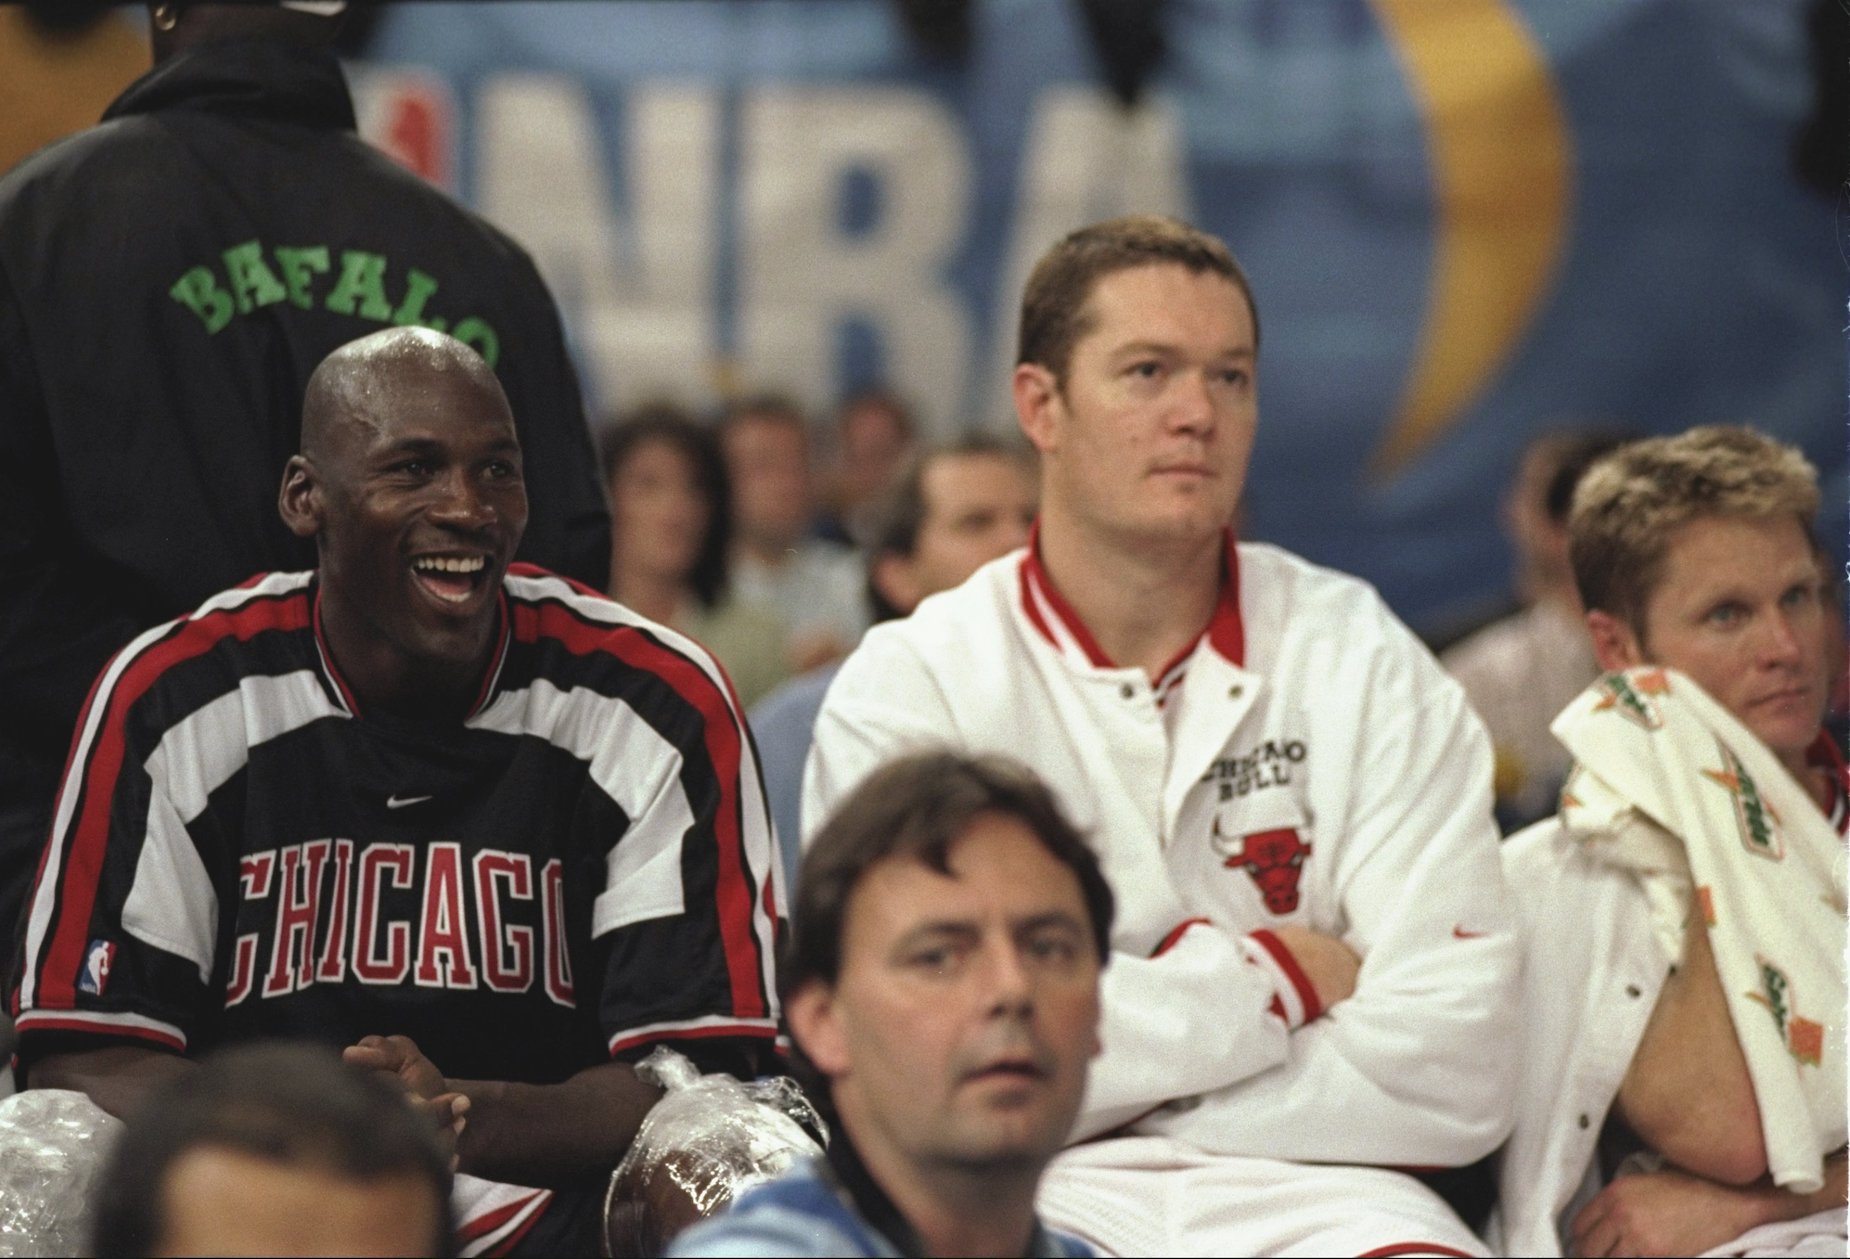 Michael Jordan (L) and Luc Longley (R) sit together on the bench as members of the Chicago Bulls.